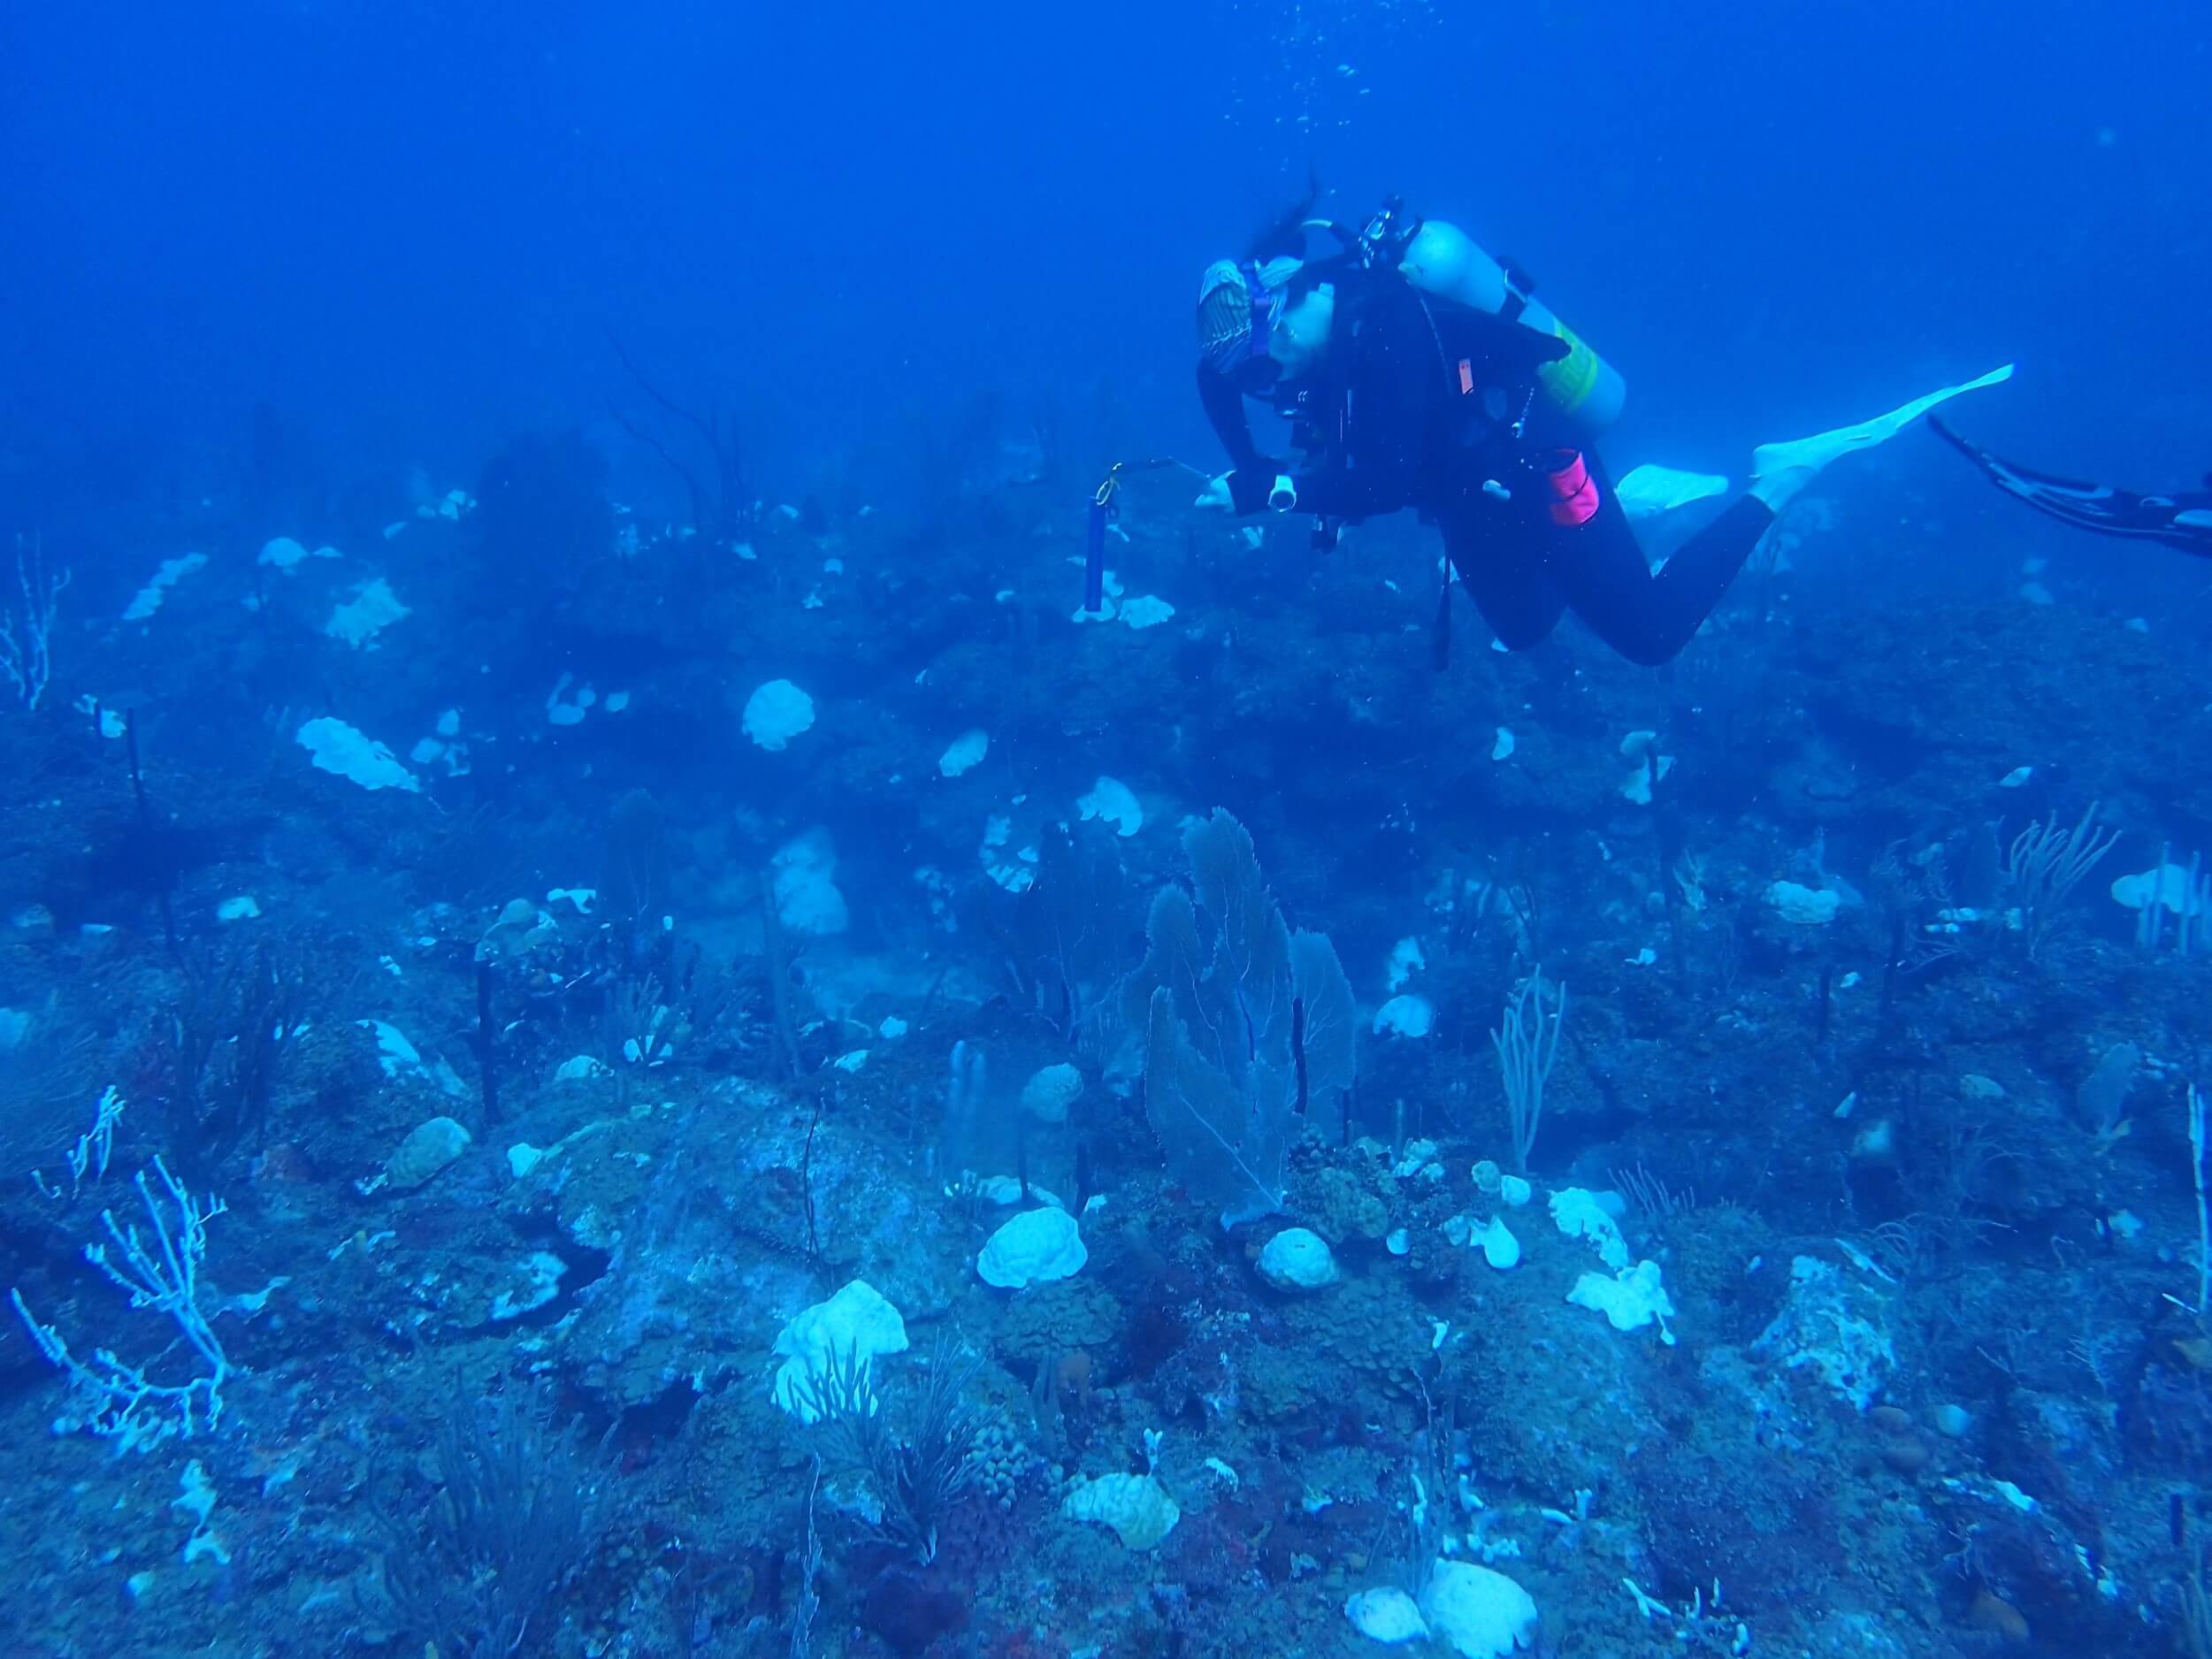 A diver observes a coral reef with bleached coral colonies scattered around.